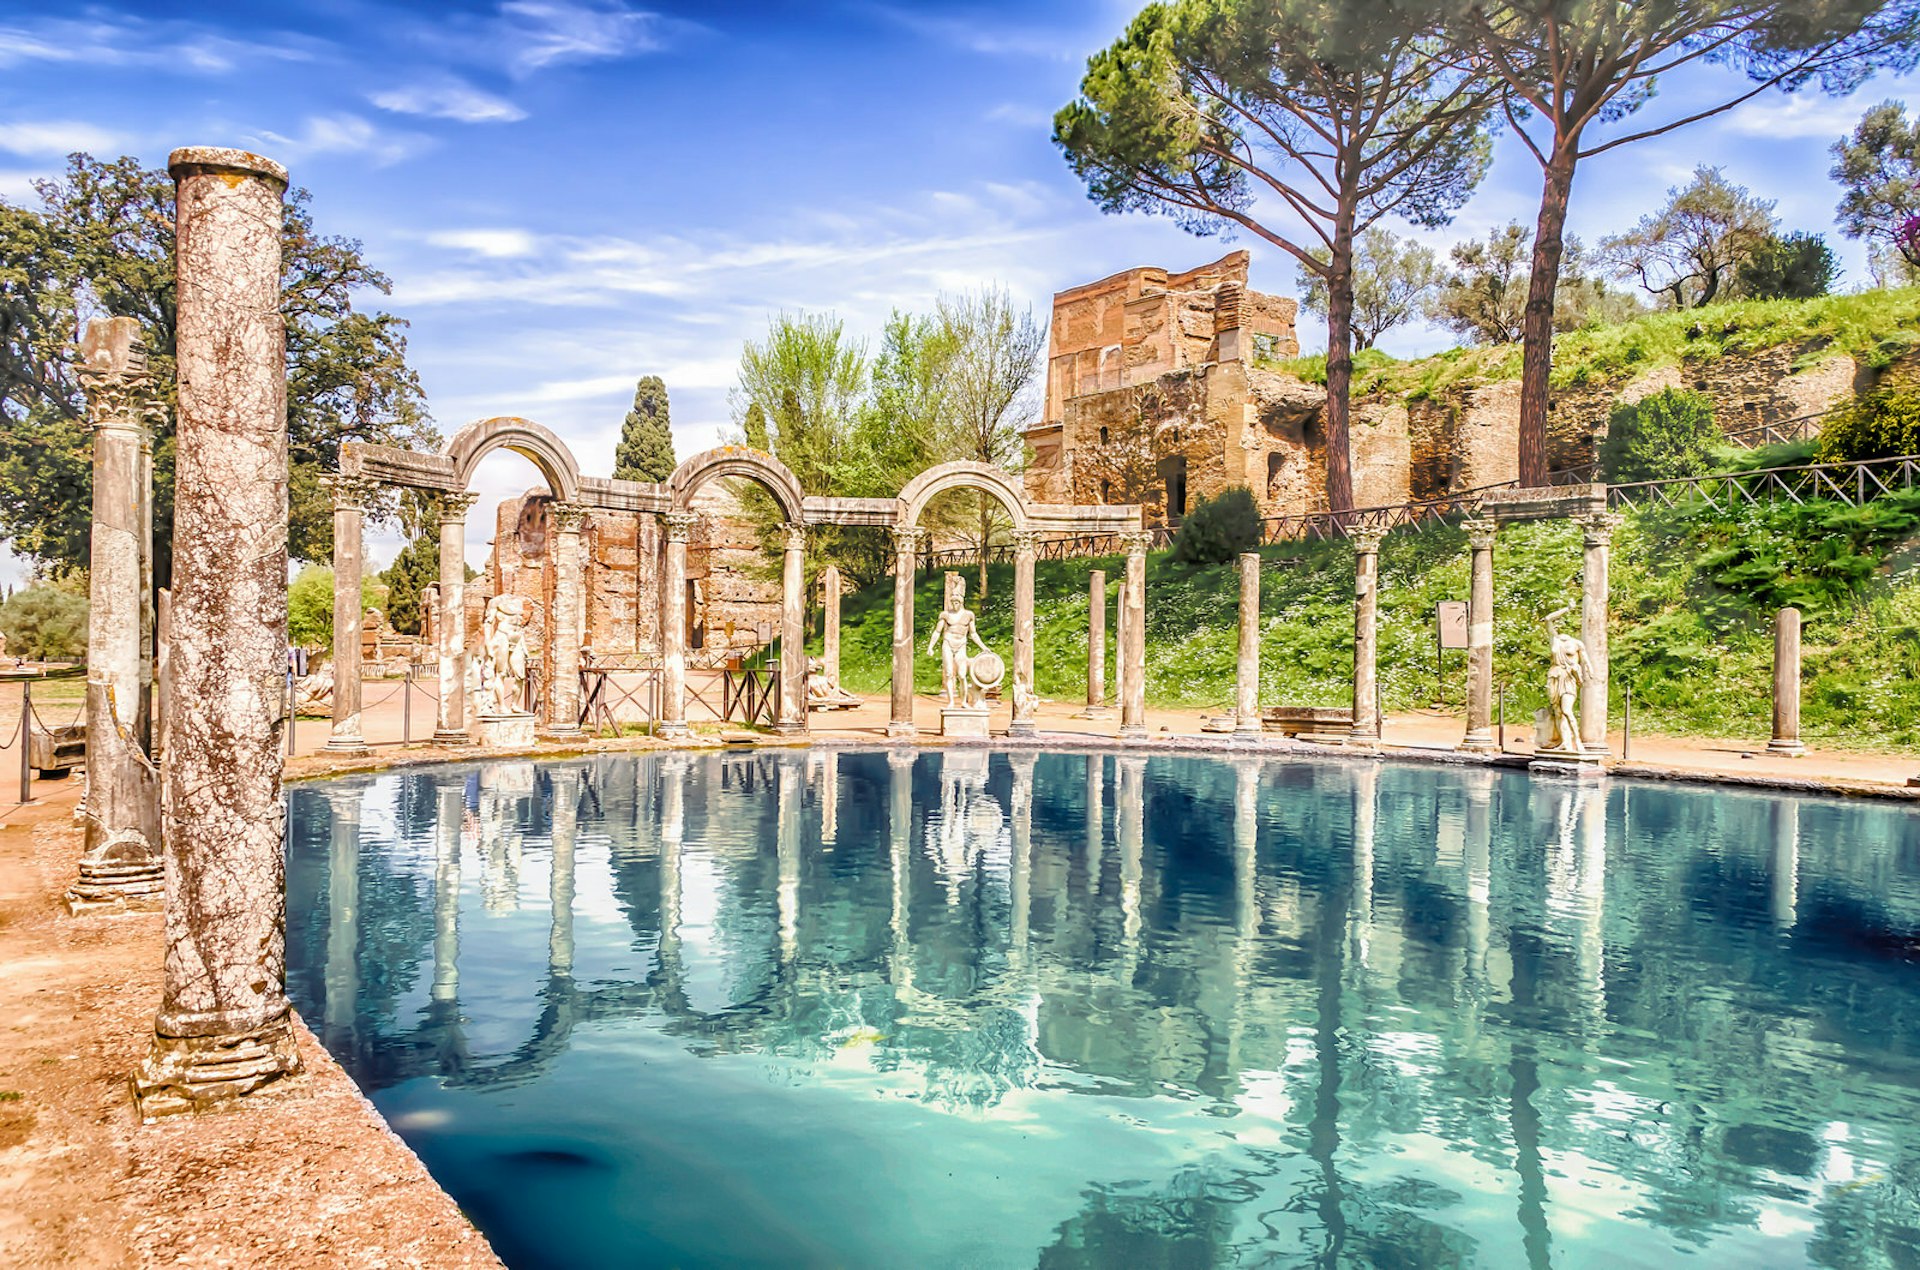 A shimmering blue pool at the Villa Adriana in Tivoli, surrounded by Roman columns, walls and statuary, with trees and grassy slopes in the background; it is the location for the Killing Eve season two finale.